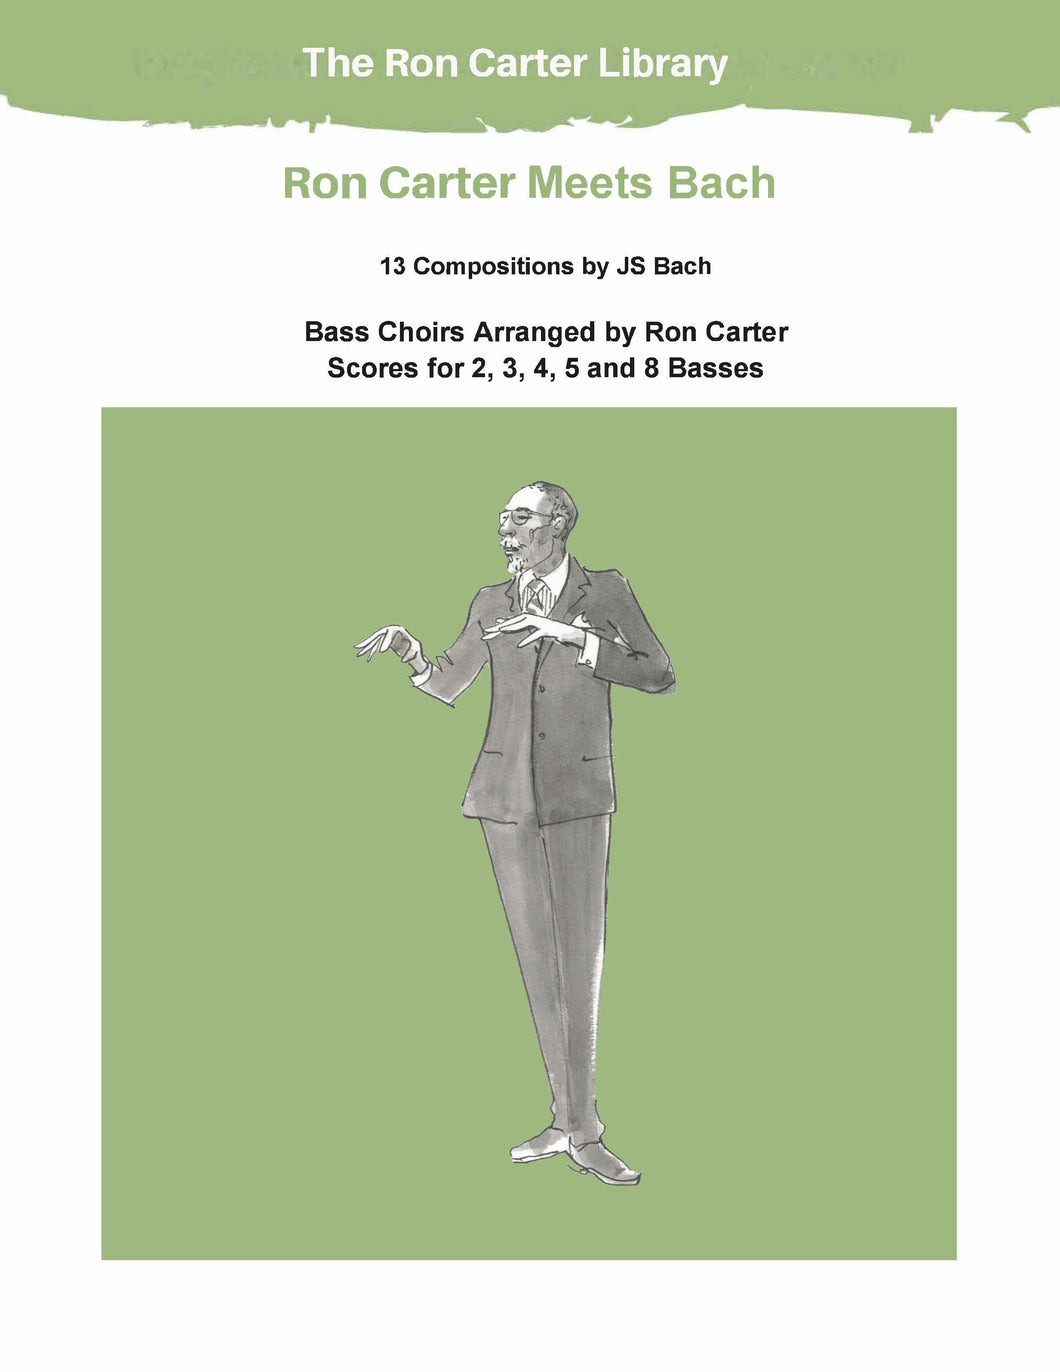 Ron Carter arrangements of 13 Bach compositions for 2, 3, 4, 5, & 8 basses These 